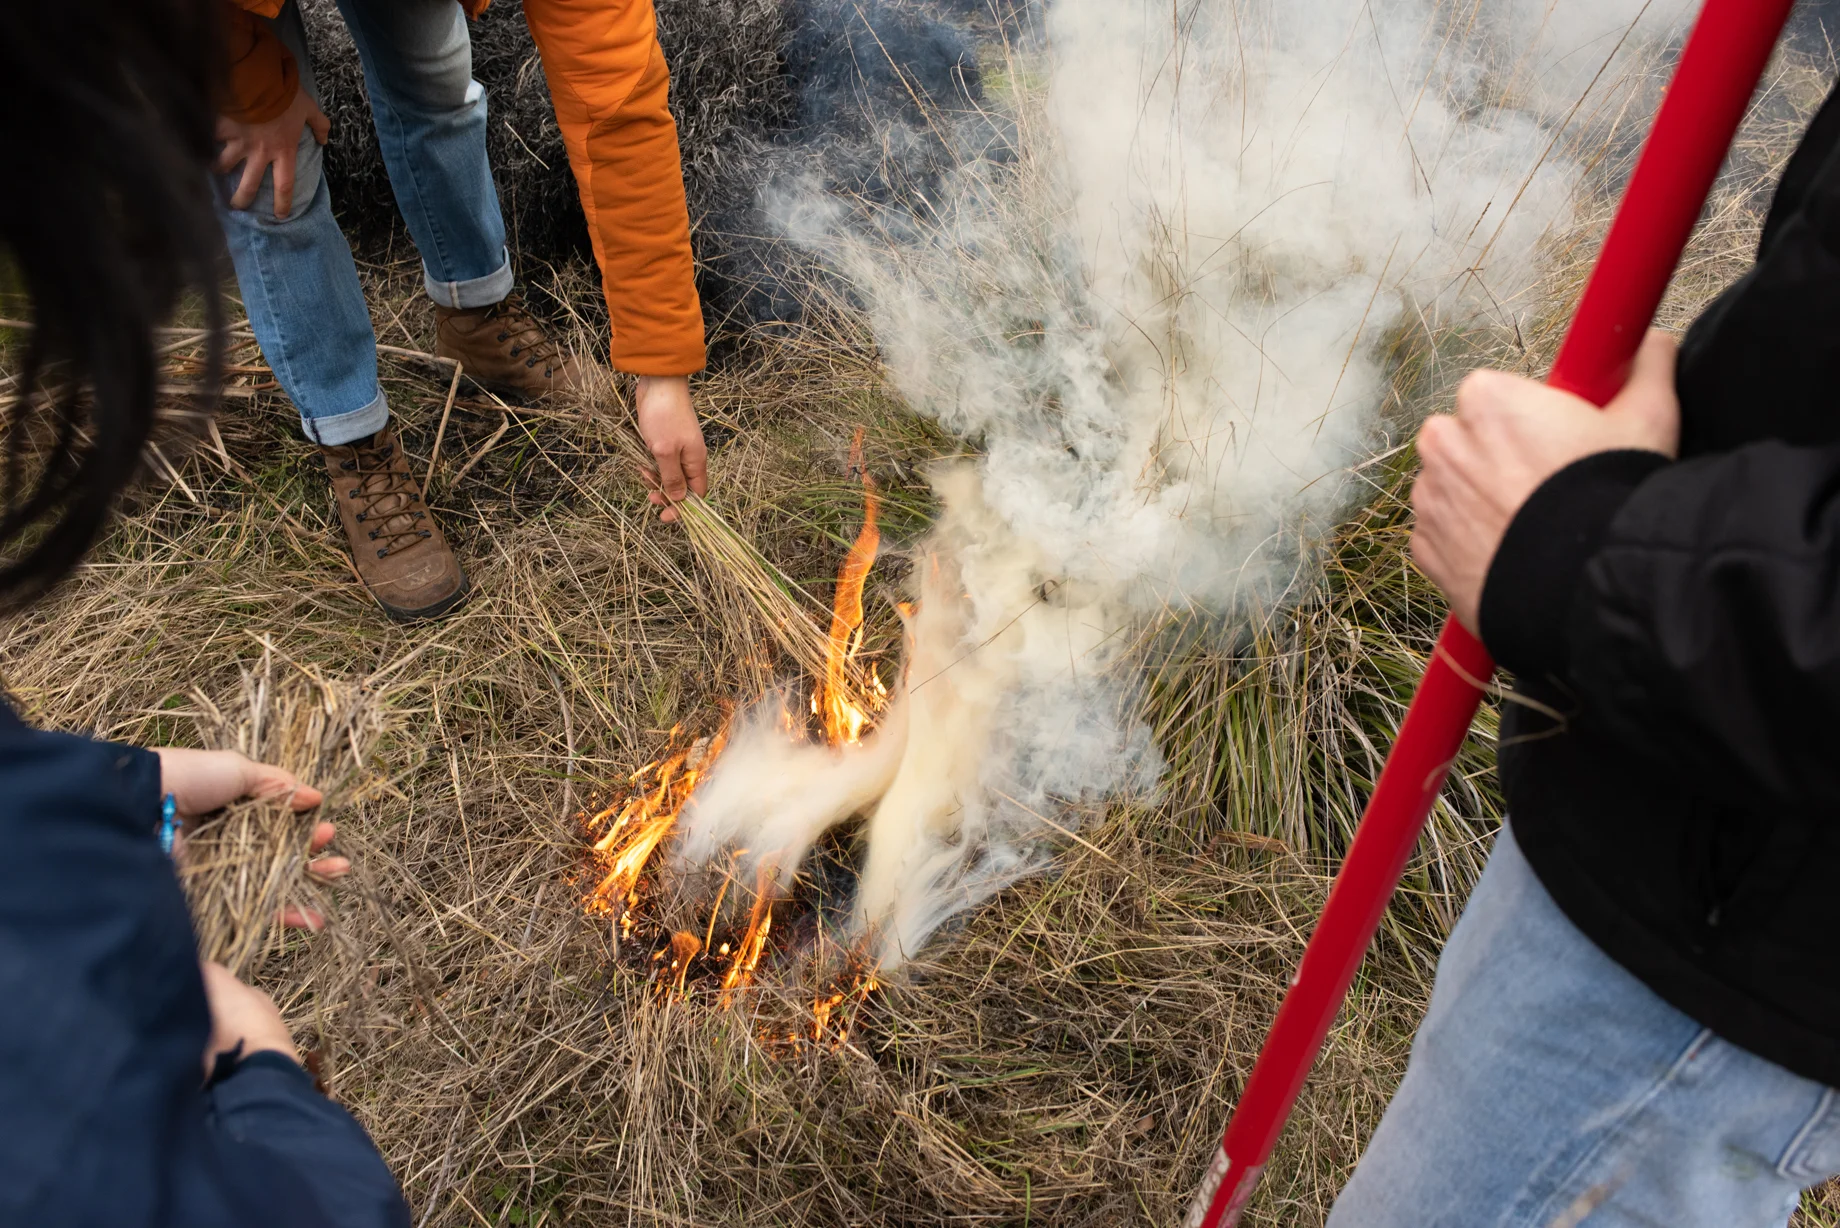 Native American fire practitioners instruct students, academics and community members in a cultural burn in Woodland, California in Feb. 2020. (Alysha Beck/UC Davis)